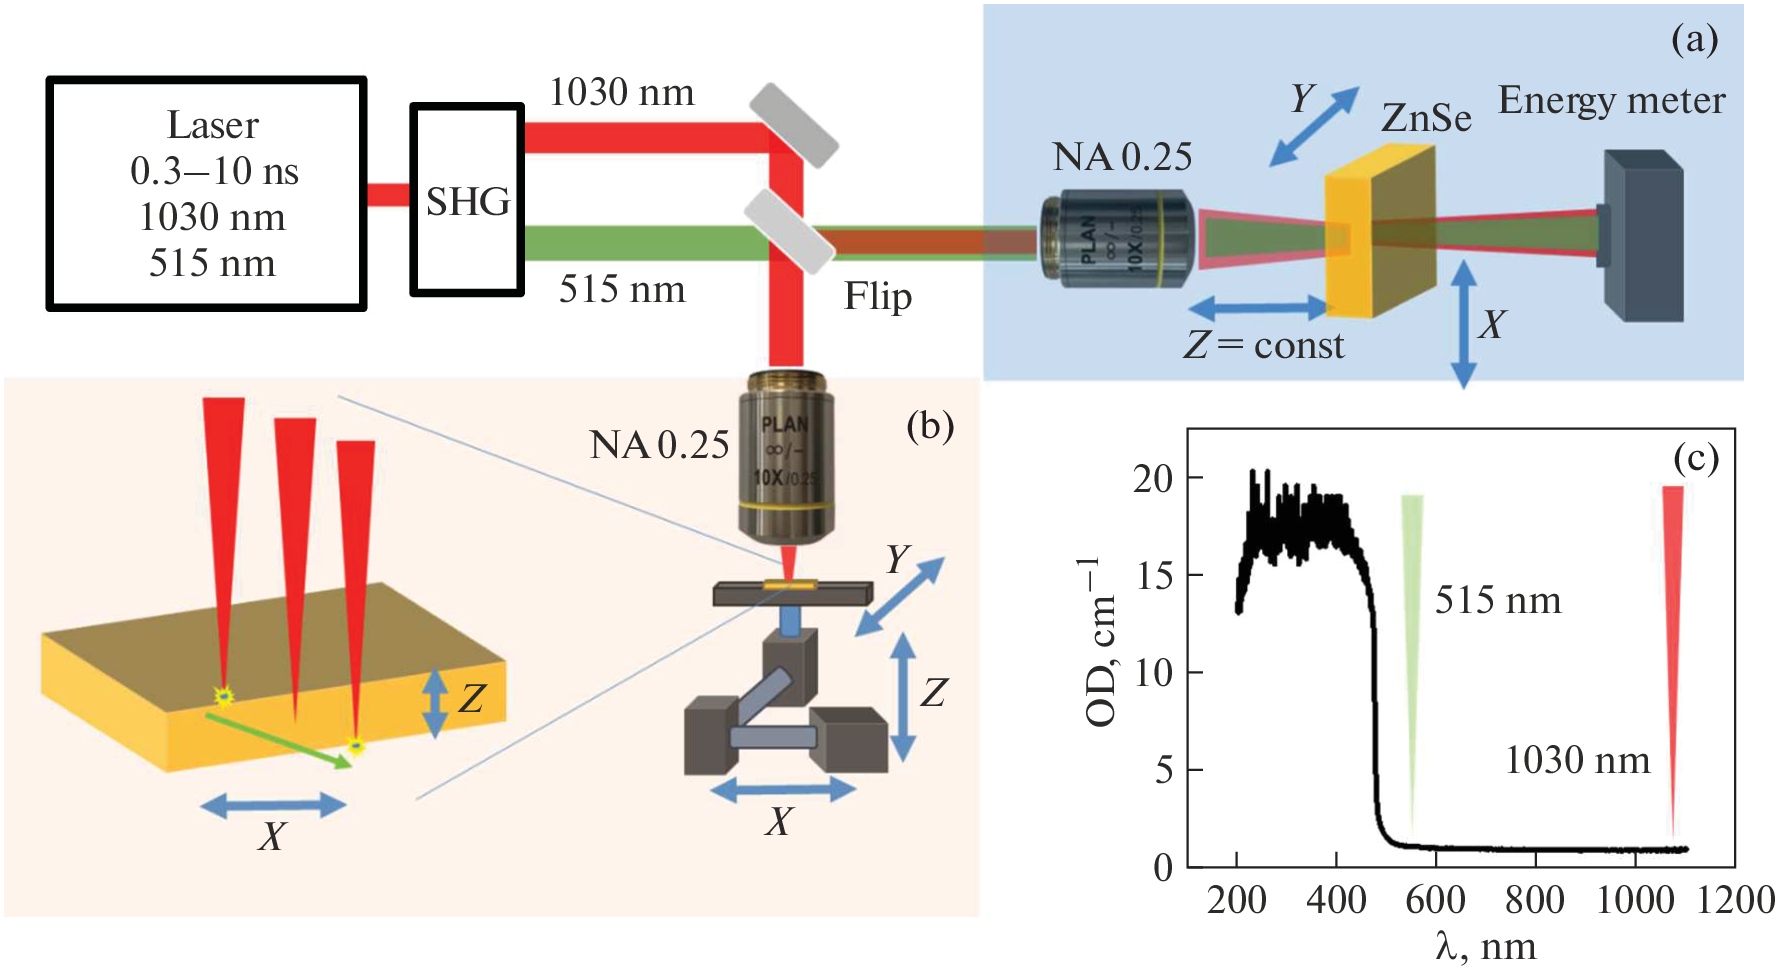 The Study of the Optical Nonlinear Properties of Bulk ZnSe for Immersion Applications